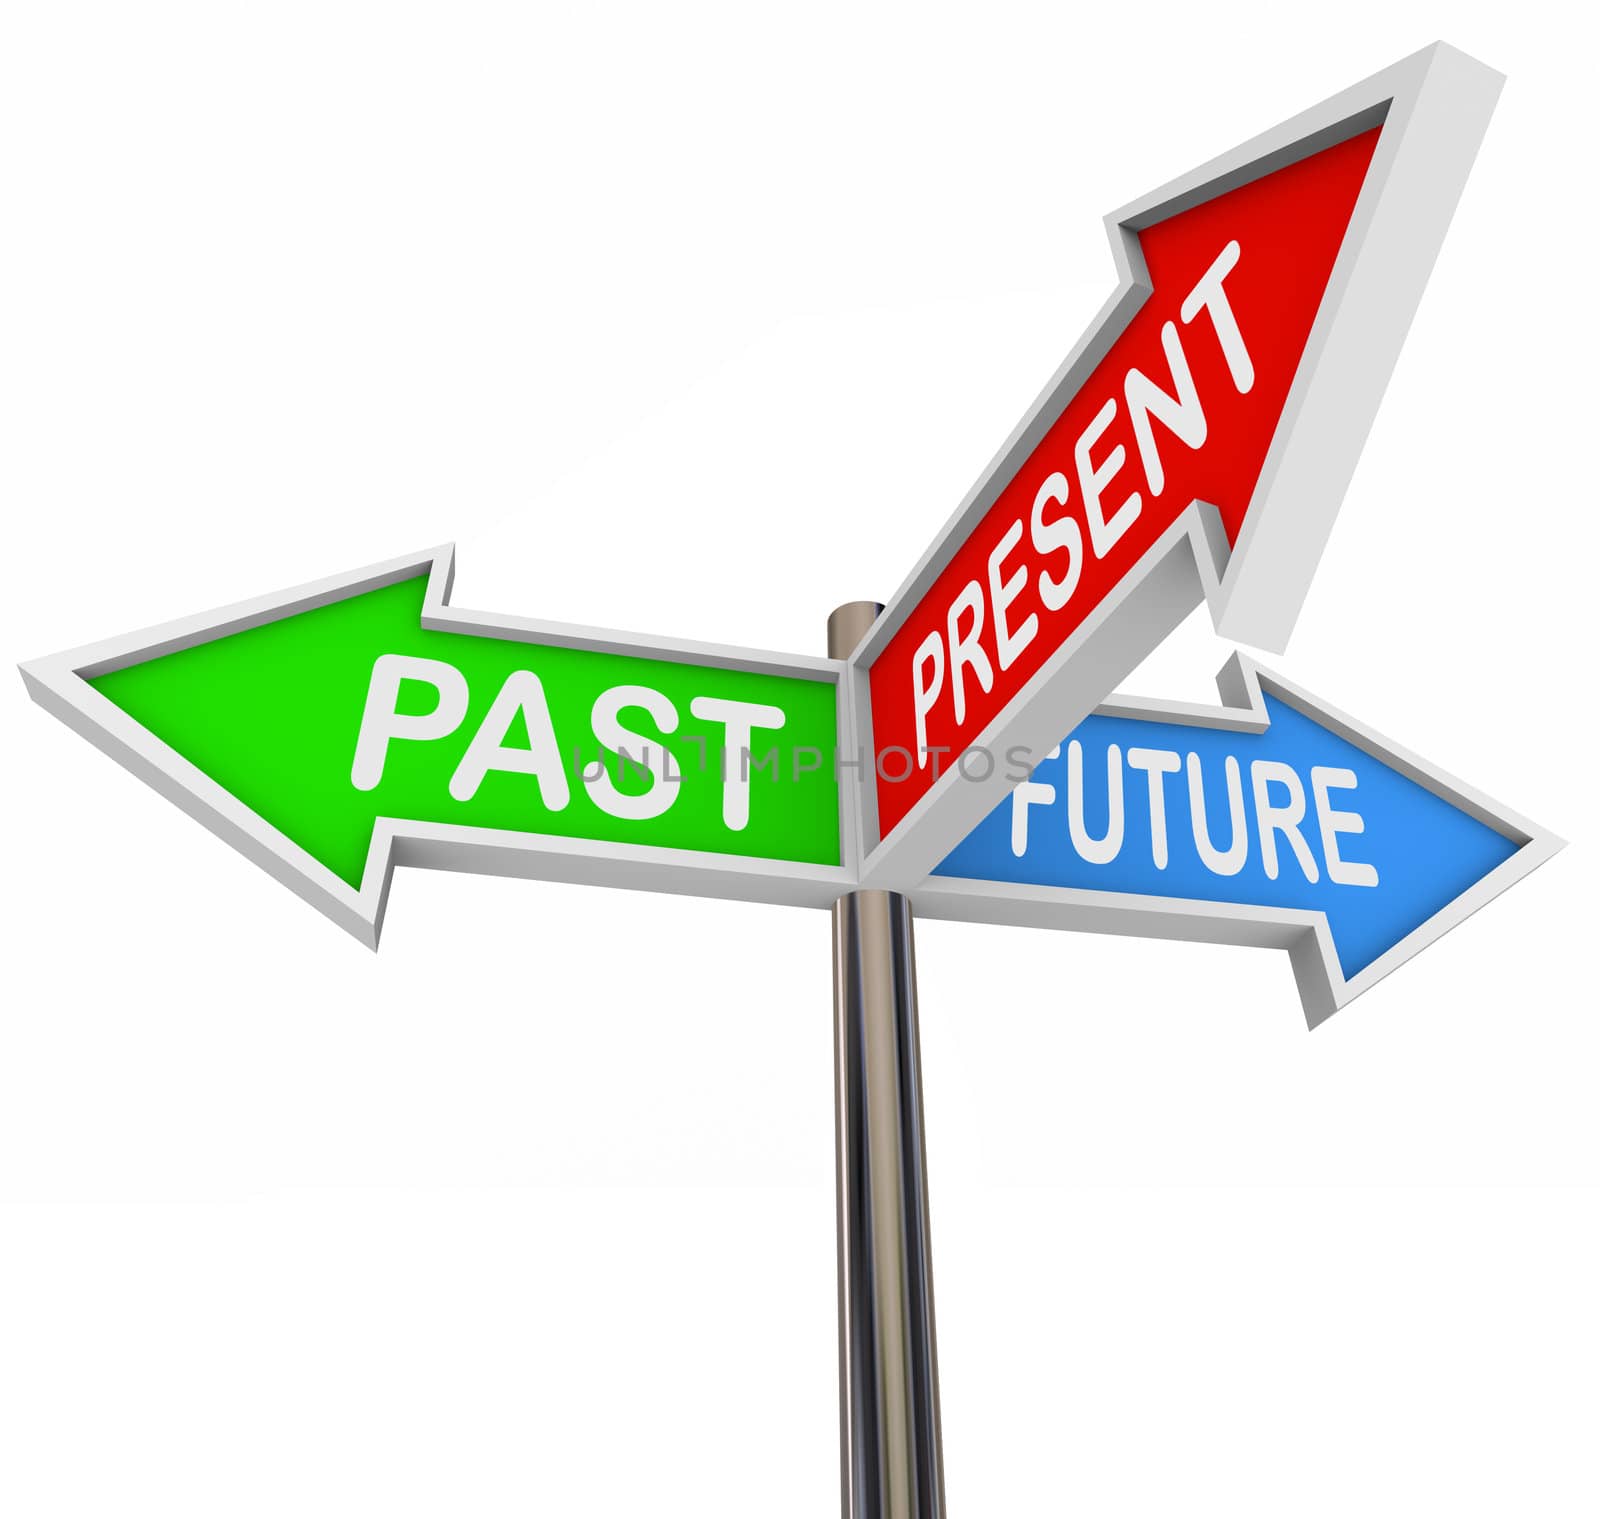 Past Present Future - 3 Colorful Arrow Signs by iQoncept